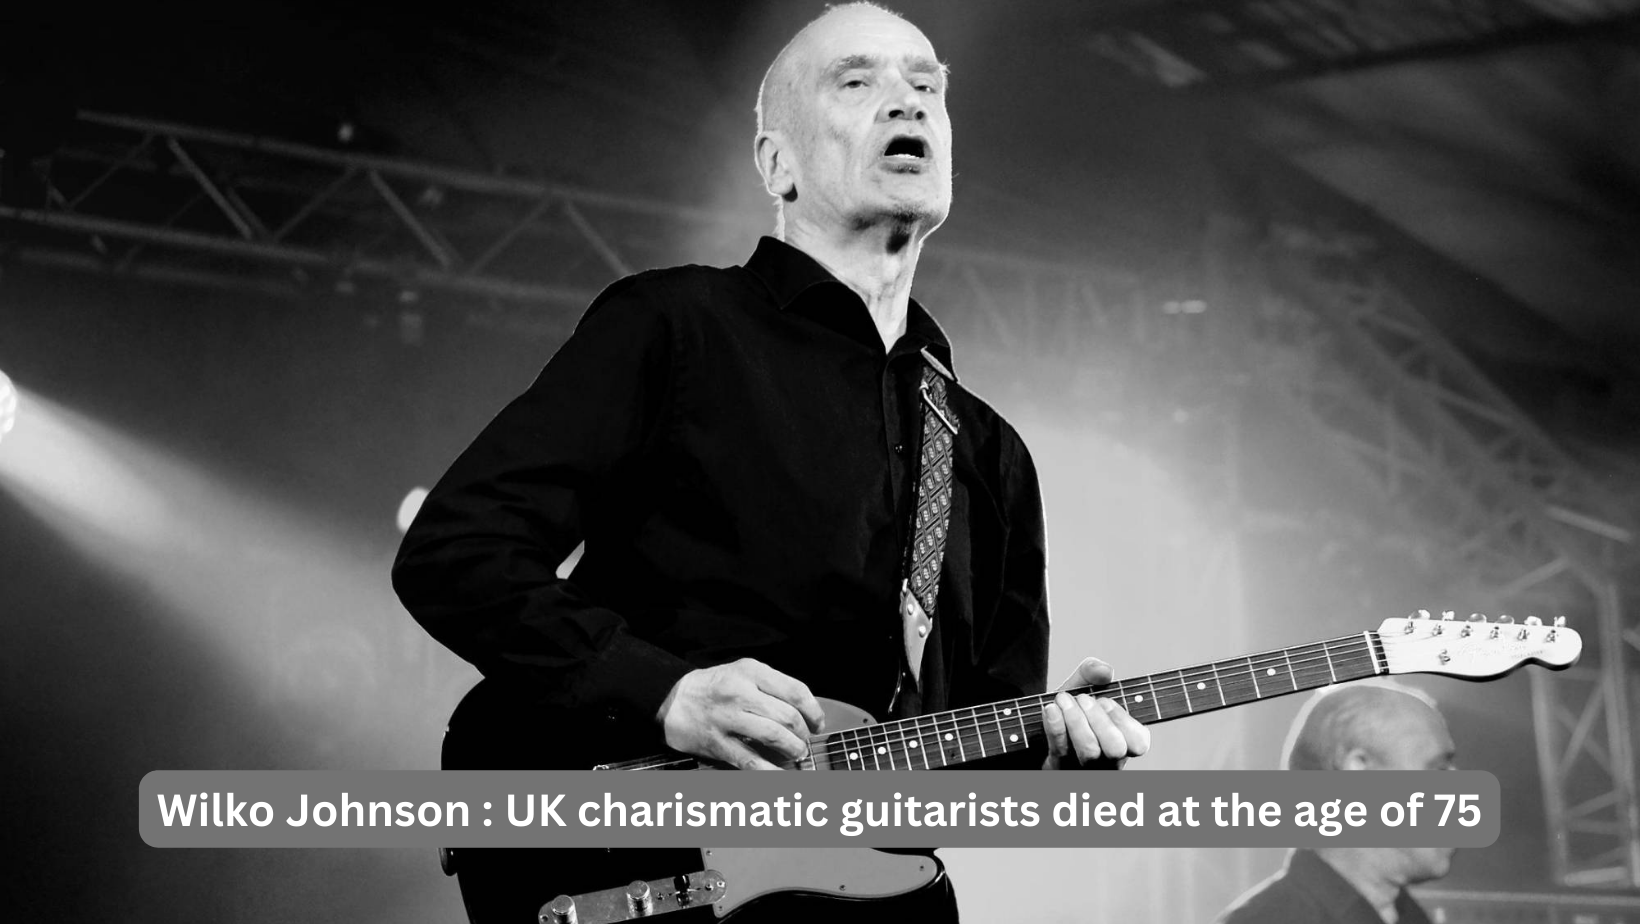 Wilko Johnson : UK charismatic guitarists died at the age of 75